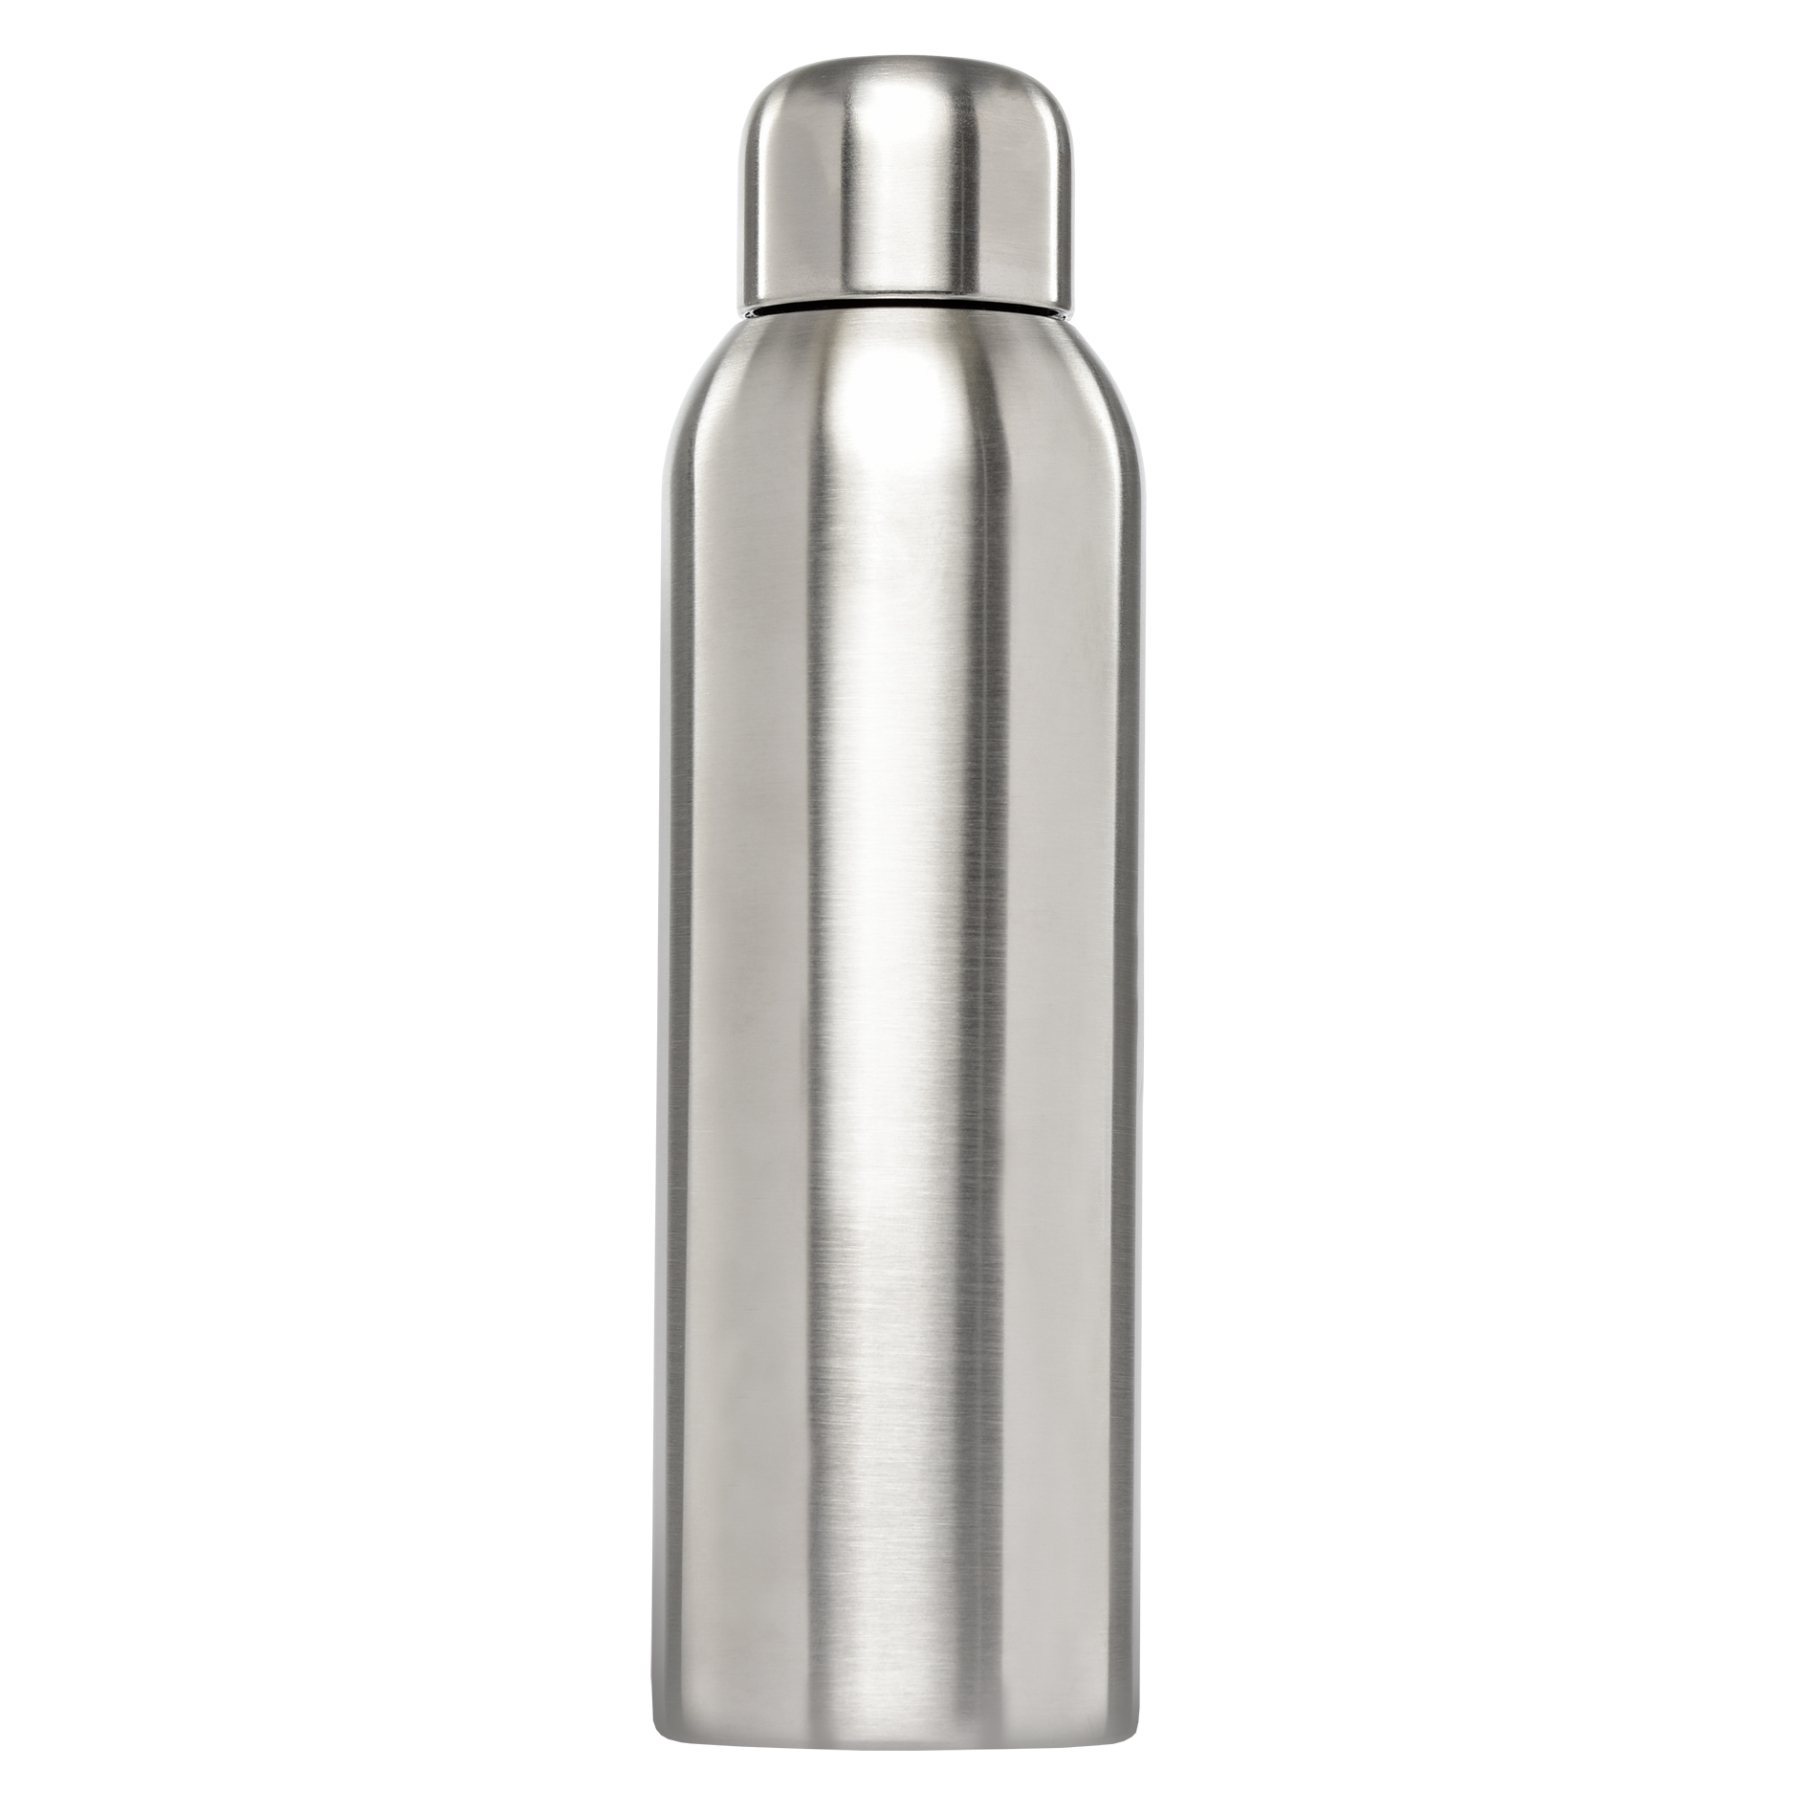 Is it safe to use a stainless steel water bottle?